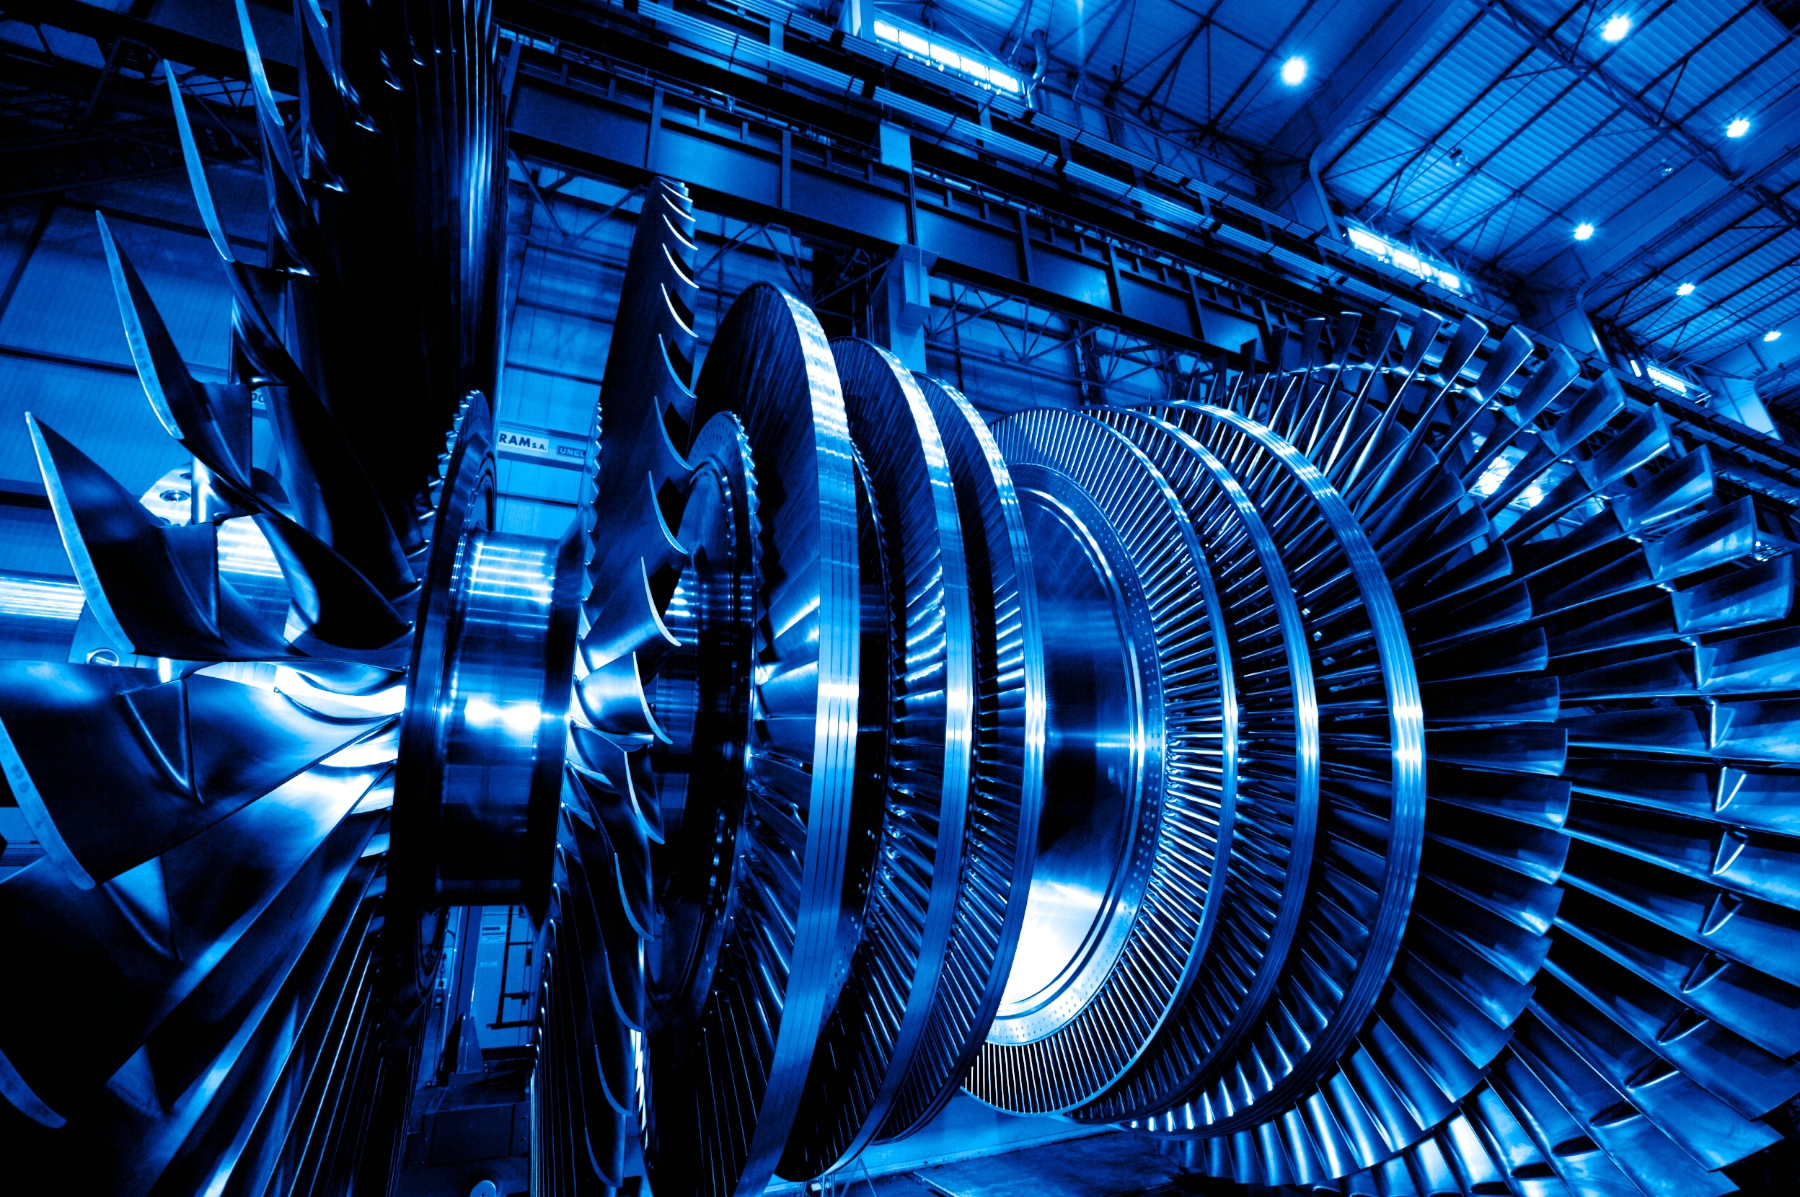 Largest Steam Turbines Ever Made Are Heading For The English Countryside. Here's Why